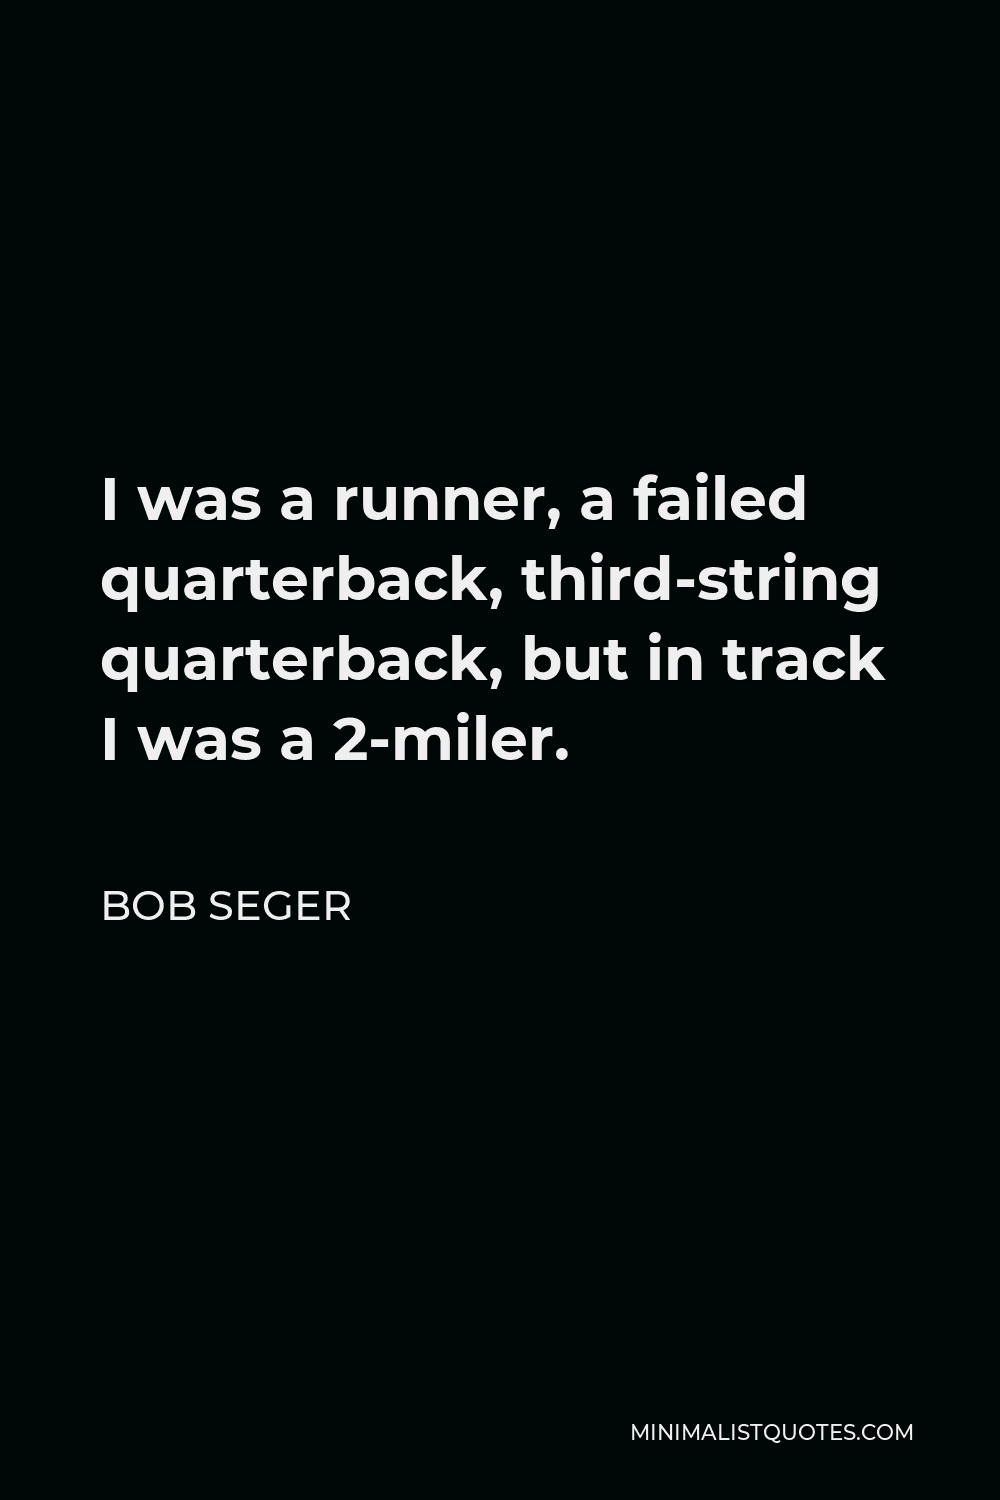 Bob Seger Quote - I was a runner, a failed quarterback, third-string quarterback, but in track I was a 2-miler.